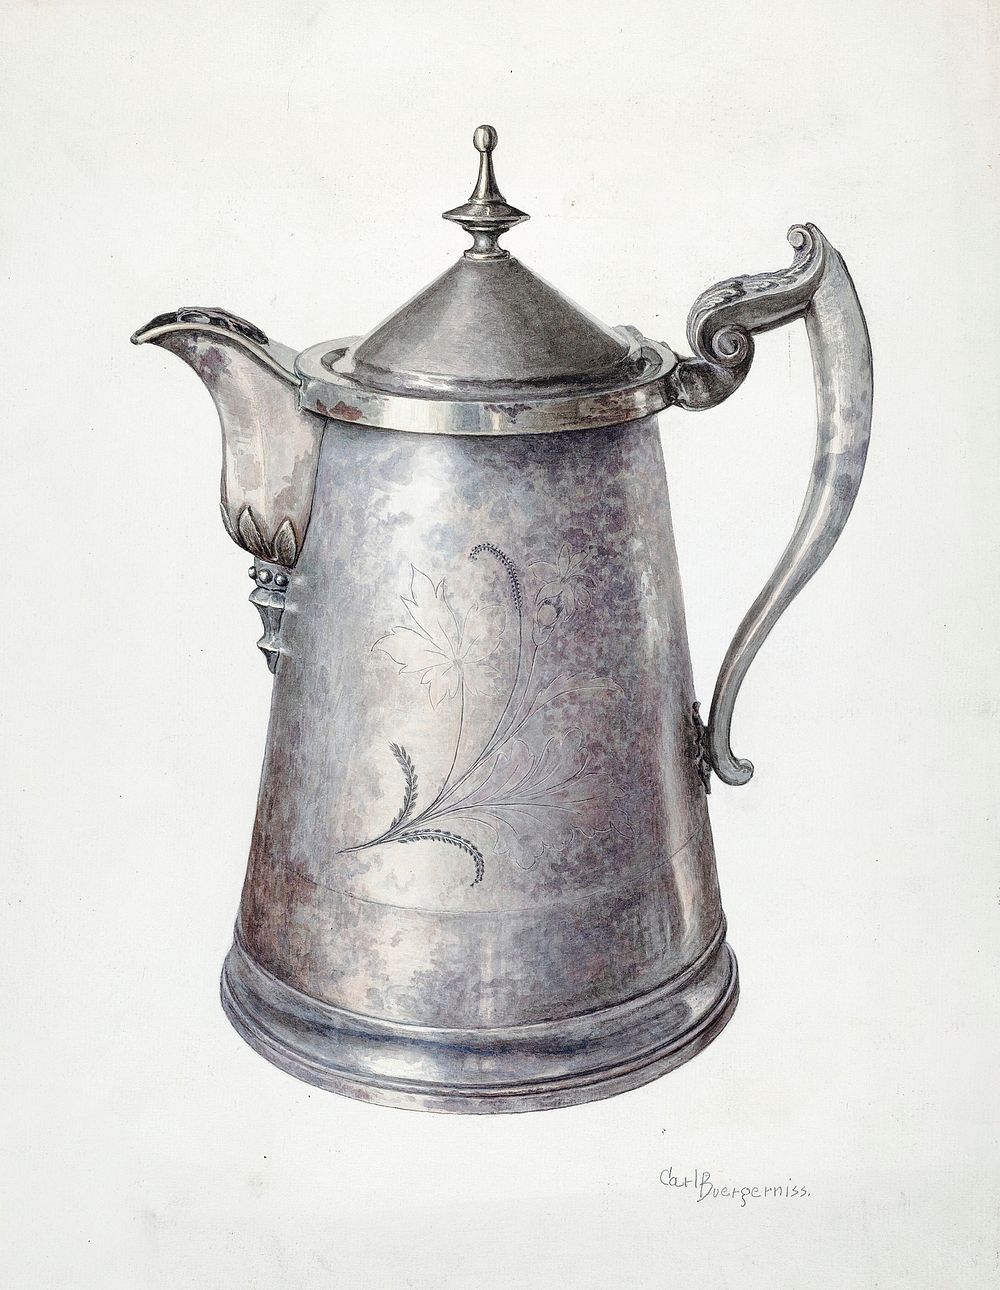 Ice Water Pitcher (ca. 1940) by Carl Buergerniss. Original from The National Gallery of Art. Digitally enhanced by rawpixel.